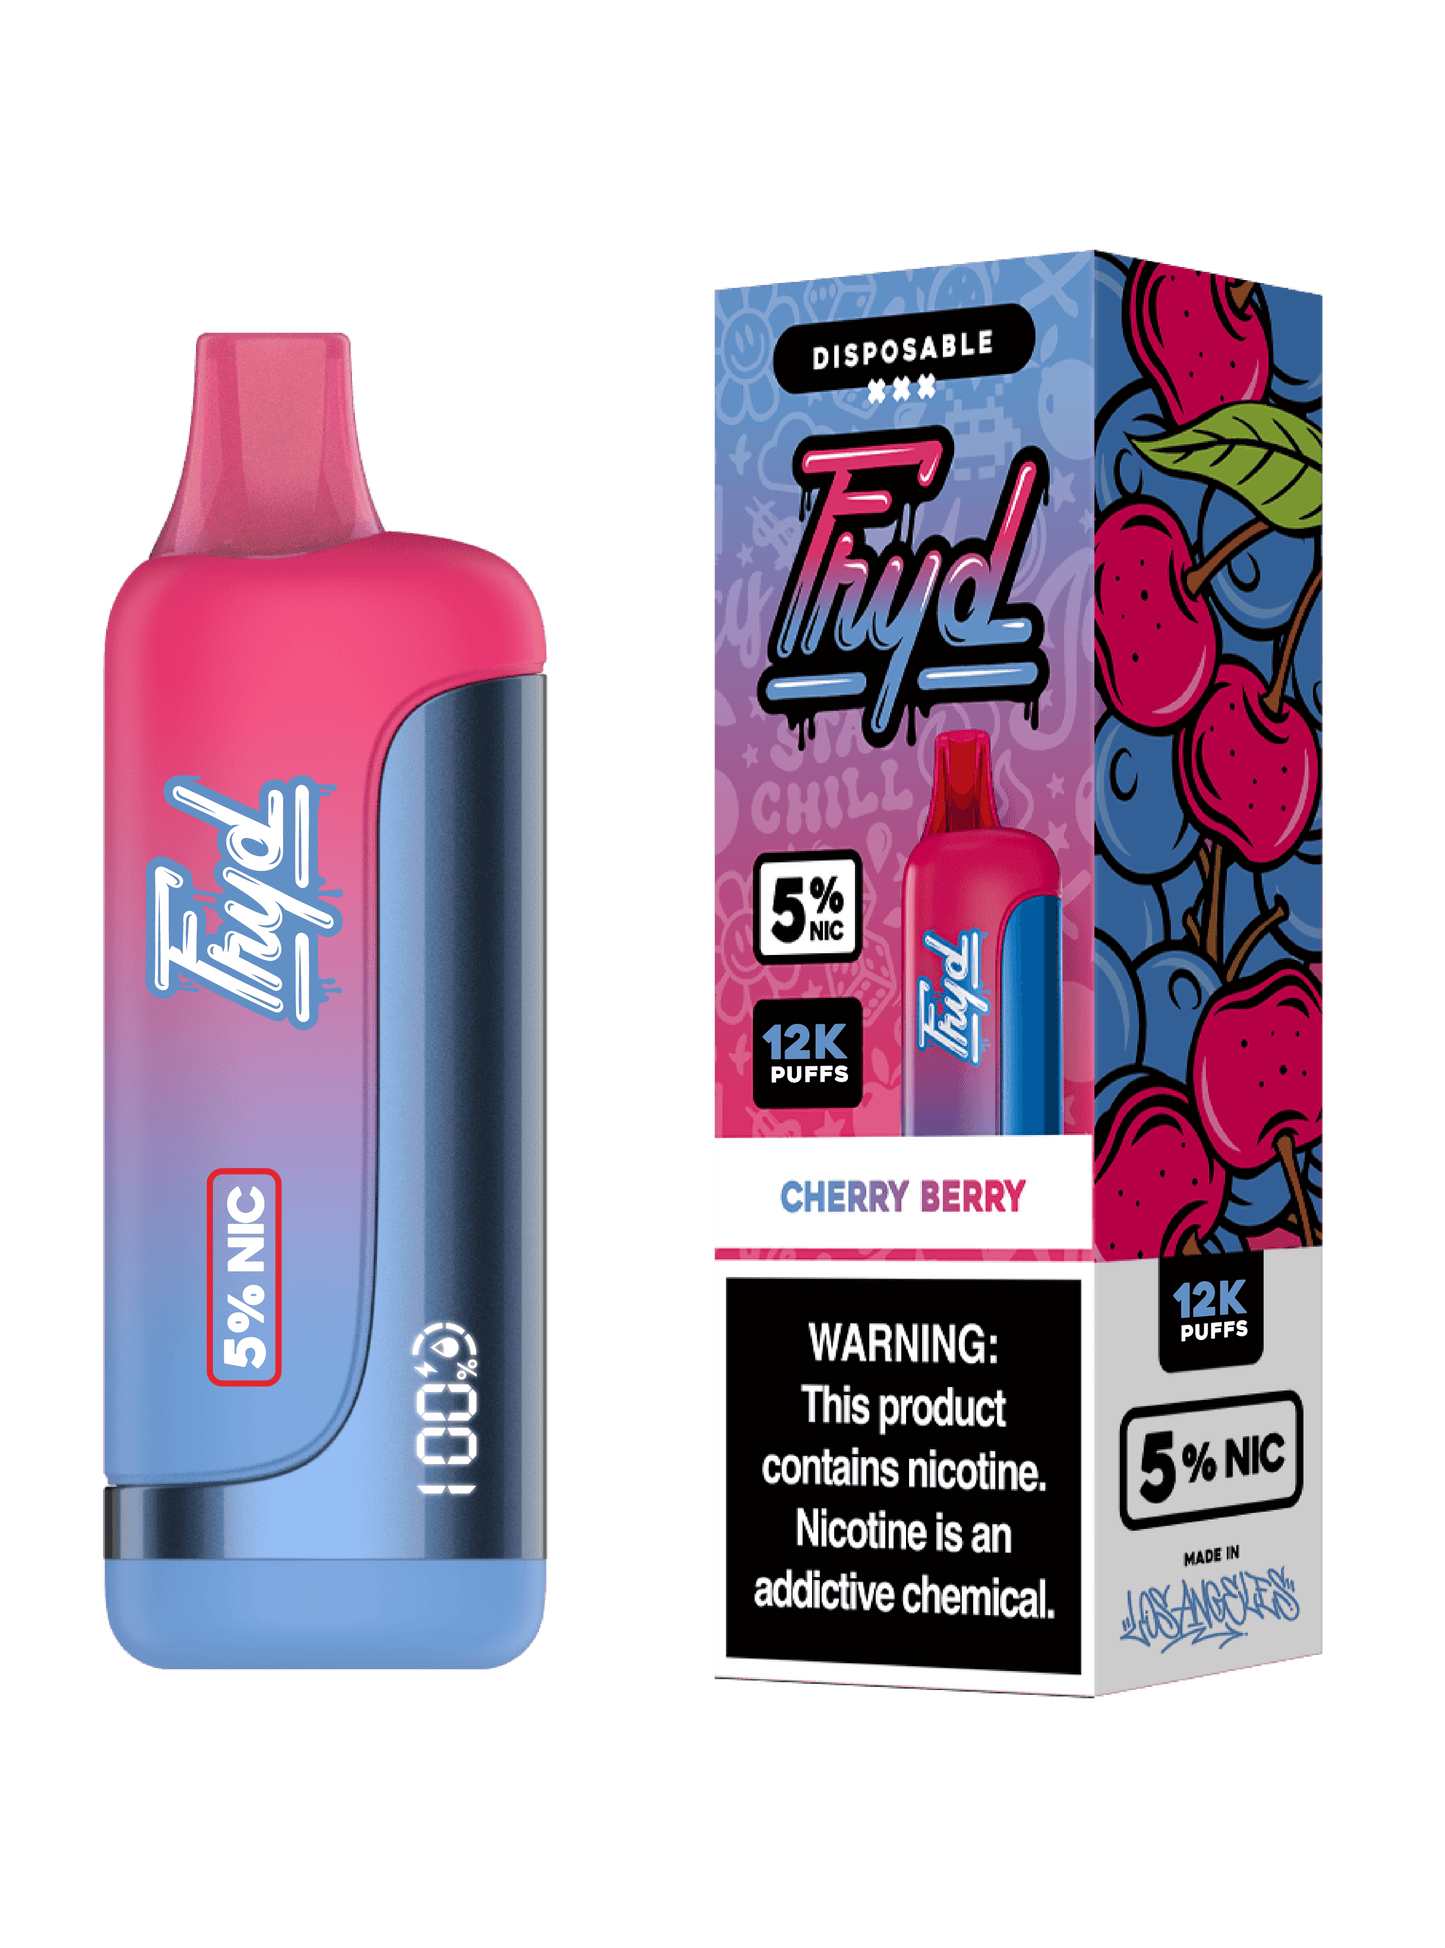 FRYD Disposable 12,0000 Puffs (17mL) 50mg Cherry Berry with packaging